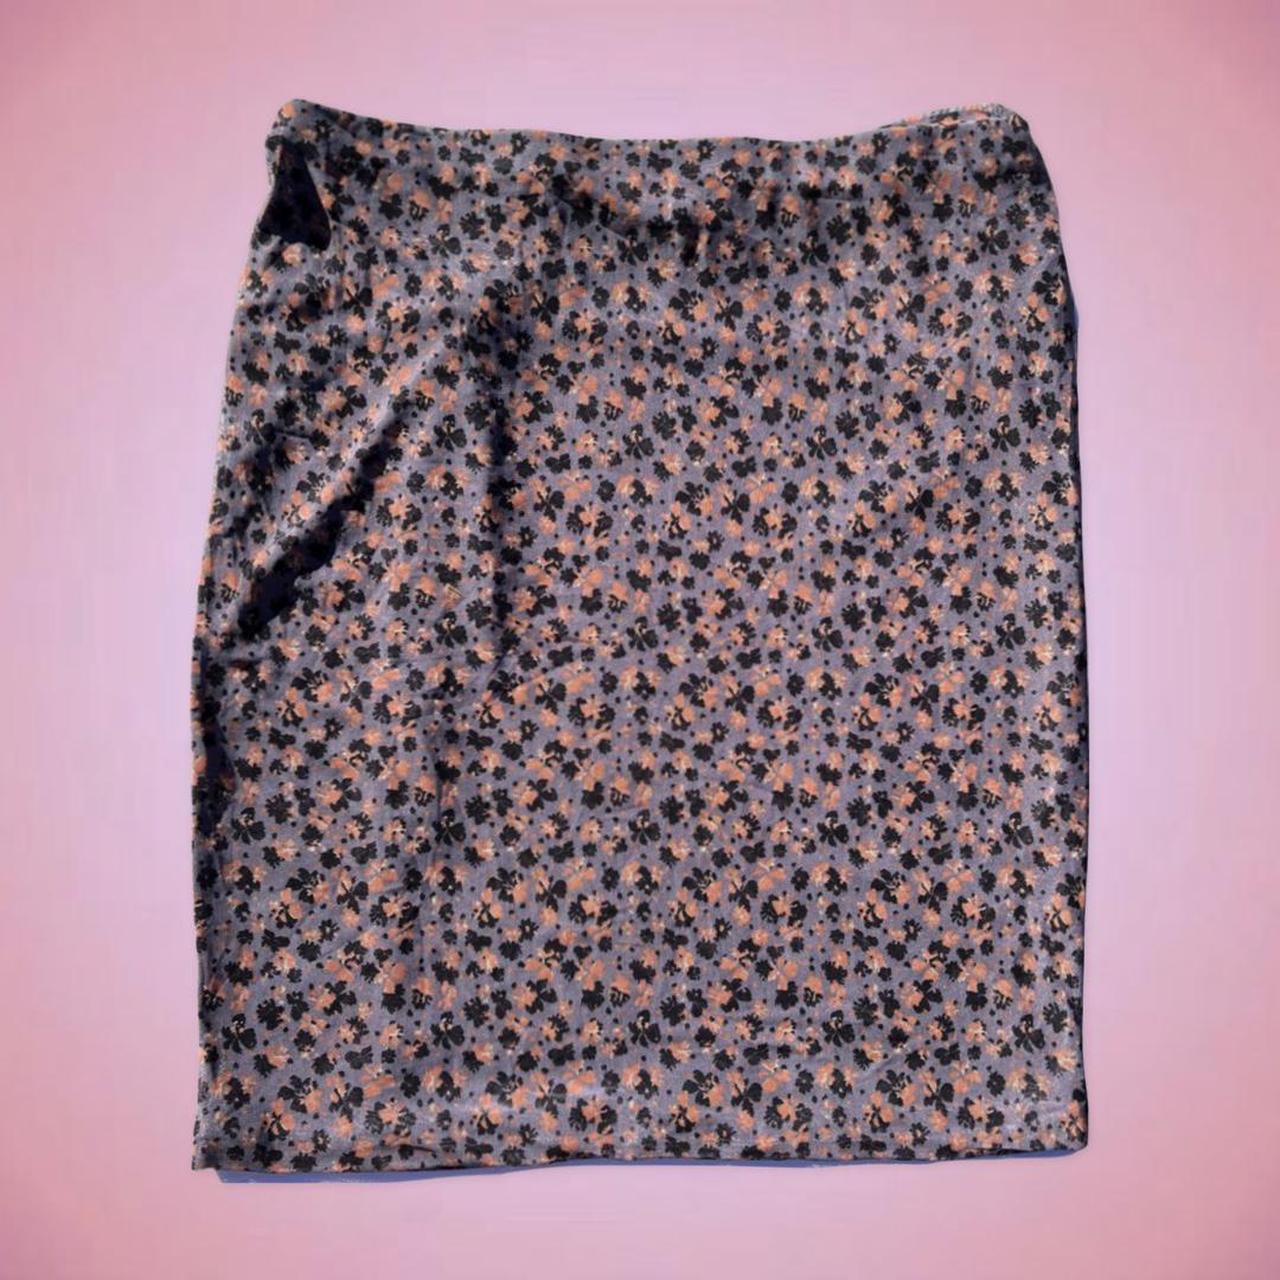 Product Image 3 - retro early 2000s floral skirt